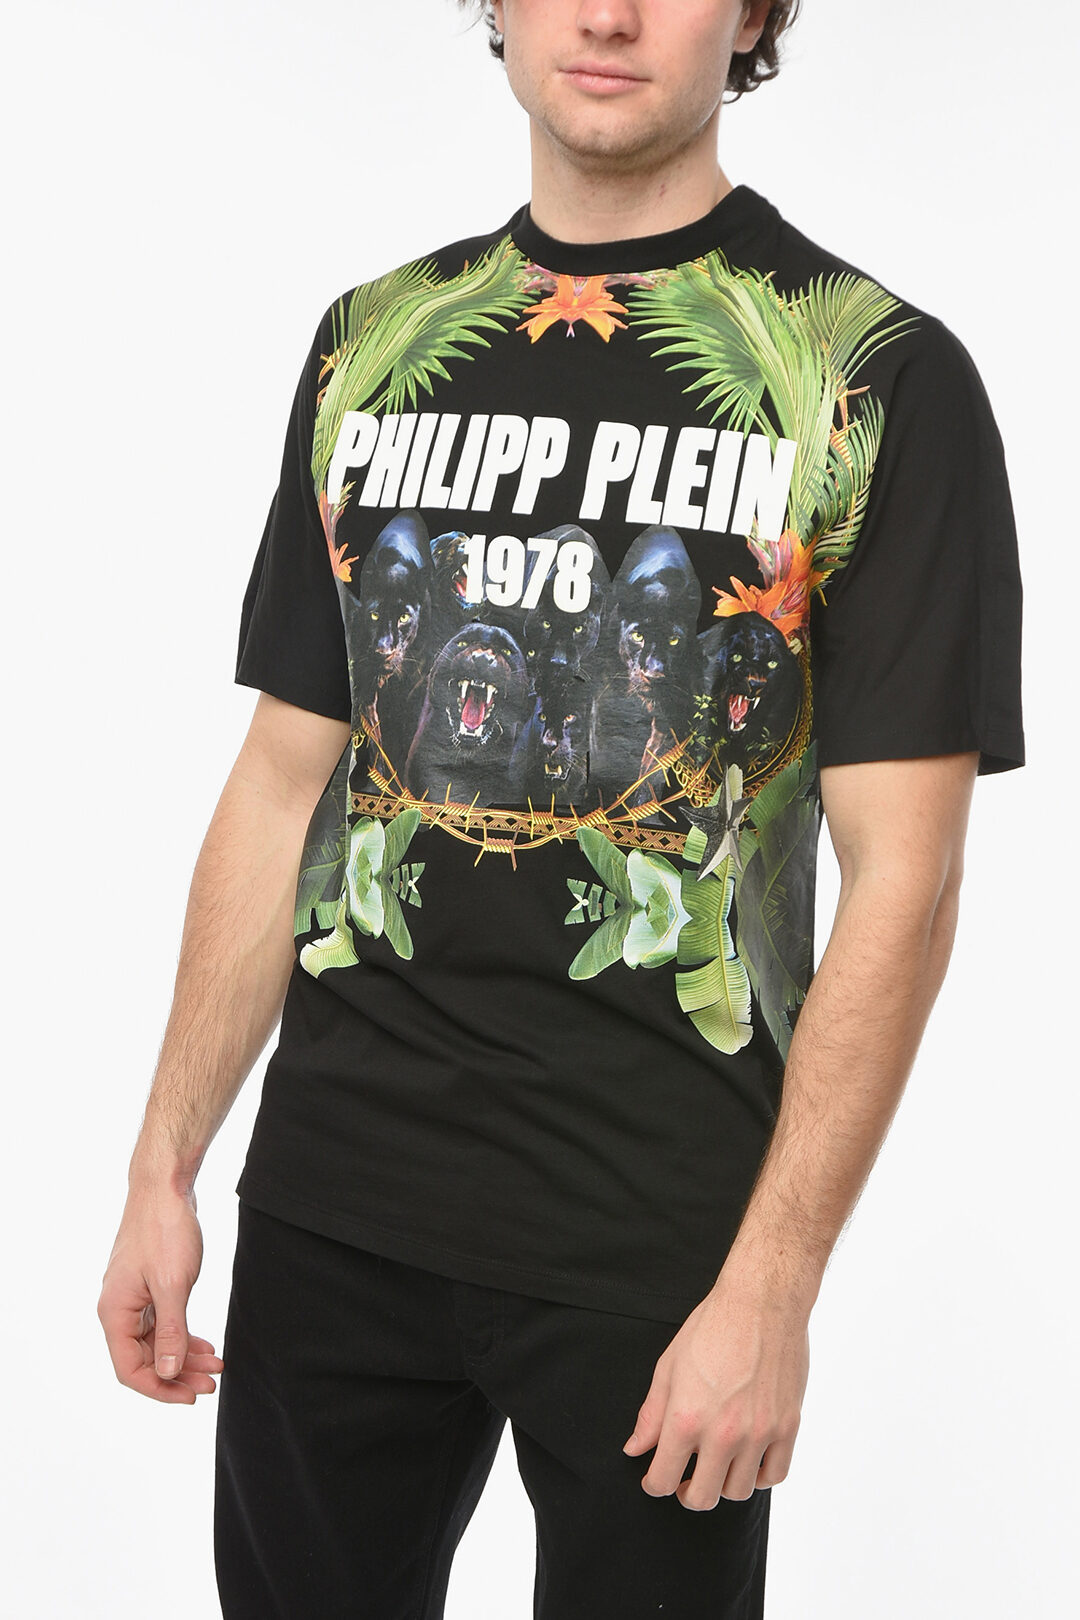 thuis Nacht applaus Philipp Plein HOMME EST.1978 LIMITED EDITION Crew-neck T-shirt with  Contrasting Lettering men - Glamood Outlet